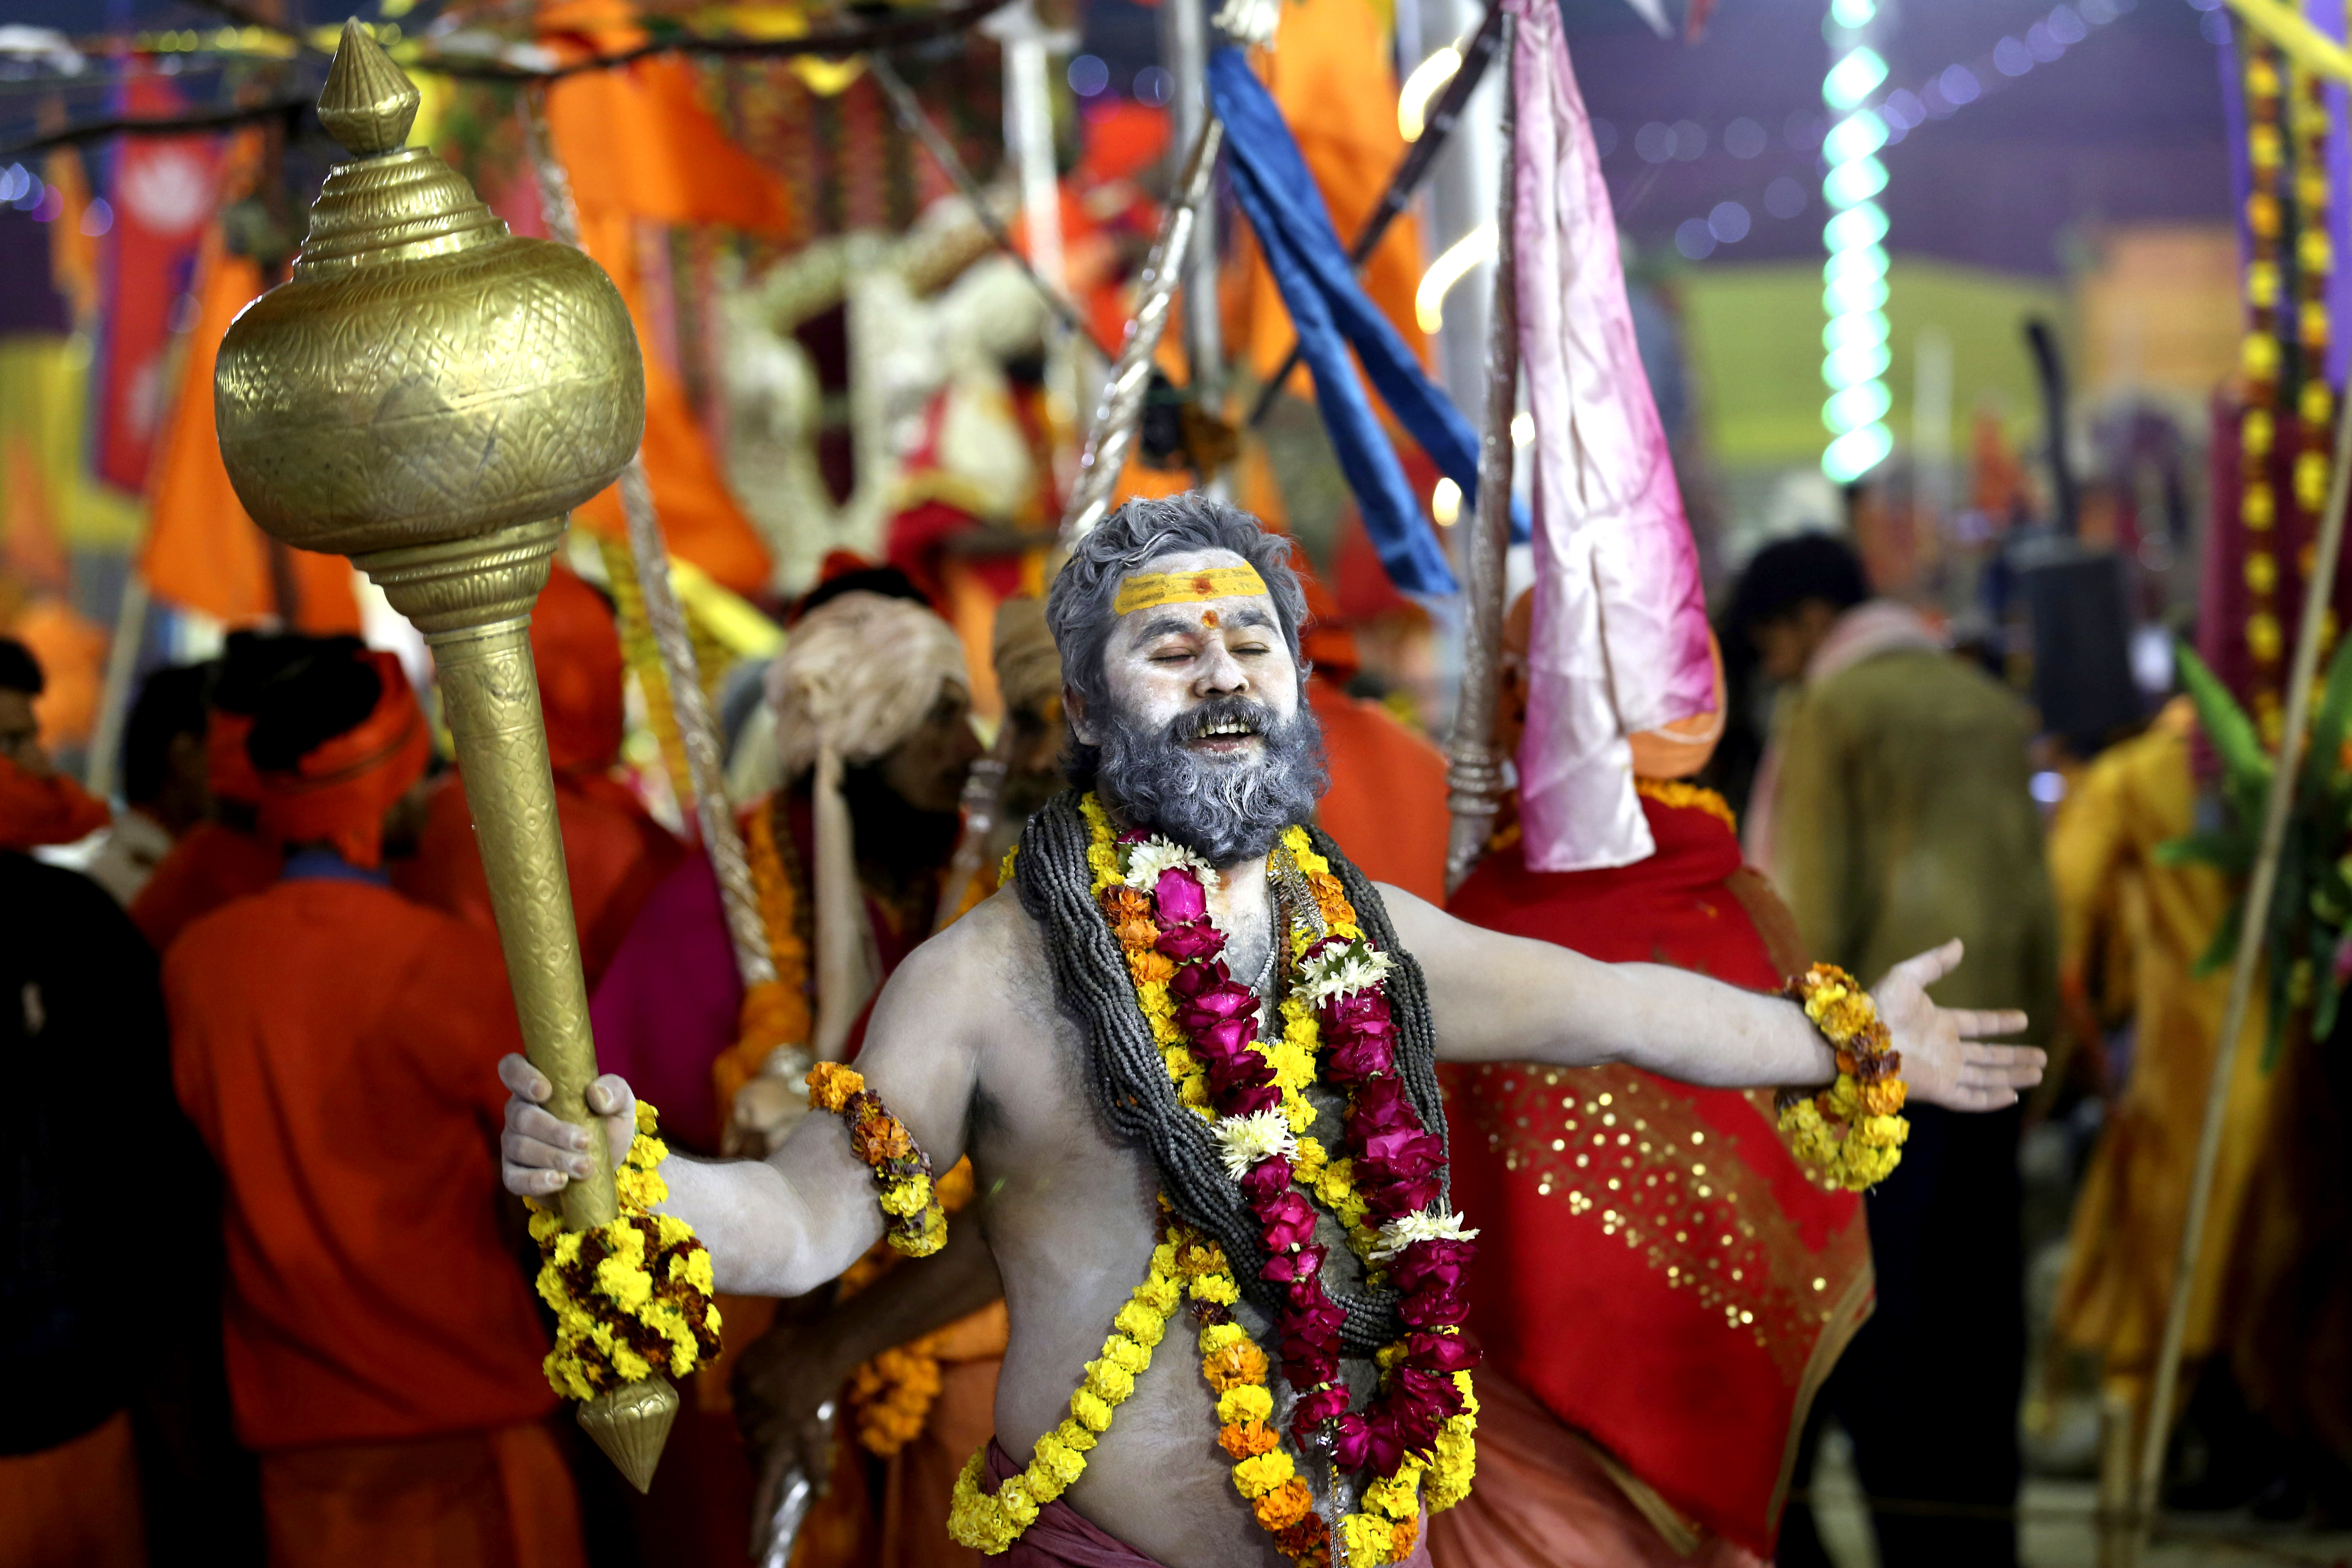 A Hindu holy man dances holding a mace as he arrives for a ritualistic dip on auspicious Makar Sankranti day during the Kumbh Mela, or pitcher festival in Prayagraj, Uttar Pradesh state, India, Tuesday, Jan.15, 2019. The Kumbh Mela is a series of ritual baths by Hindu holy men, and other pilgrims at the confluence of three sacred rivers — the Yamuna, the Ganges and the mythical Saraswati — that dates back to at least medieval times. The city’s Mughal-era name Allahabad was recently changed to Prayagraj. (AP Photo/Rajesh Kumar Singh)